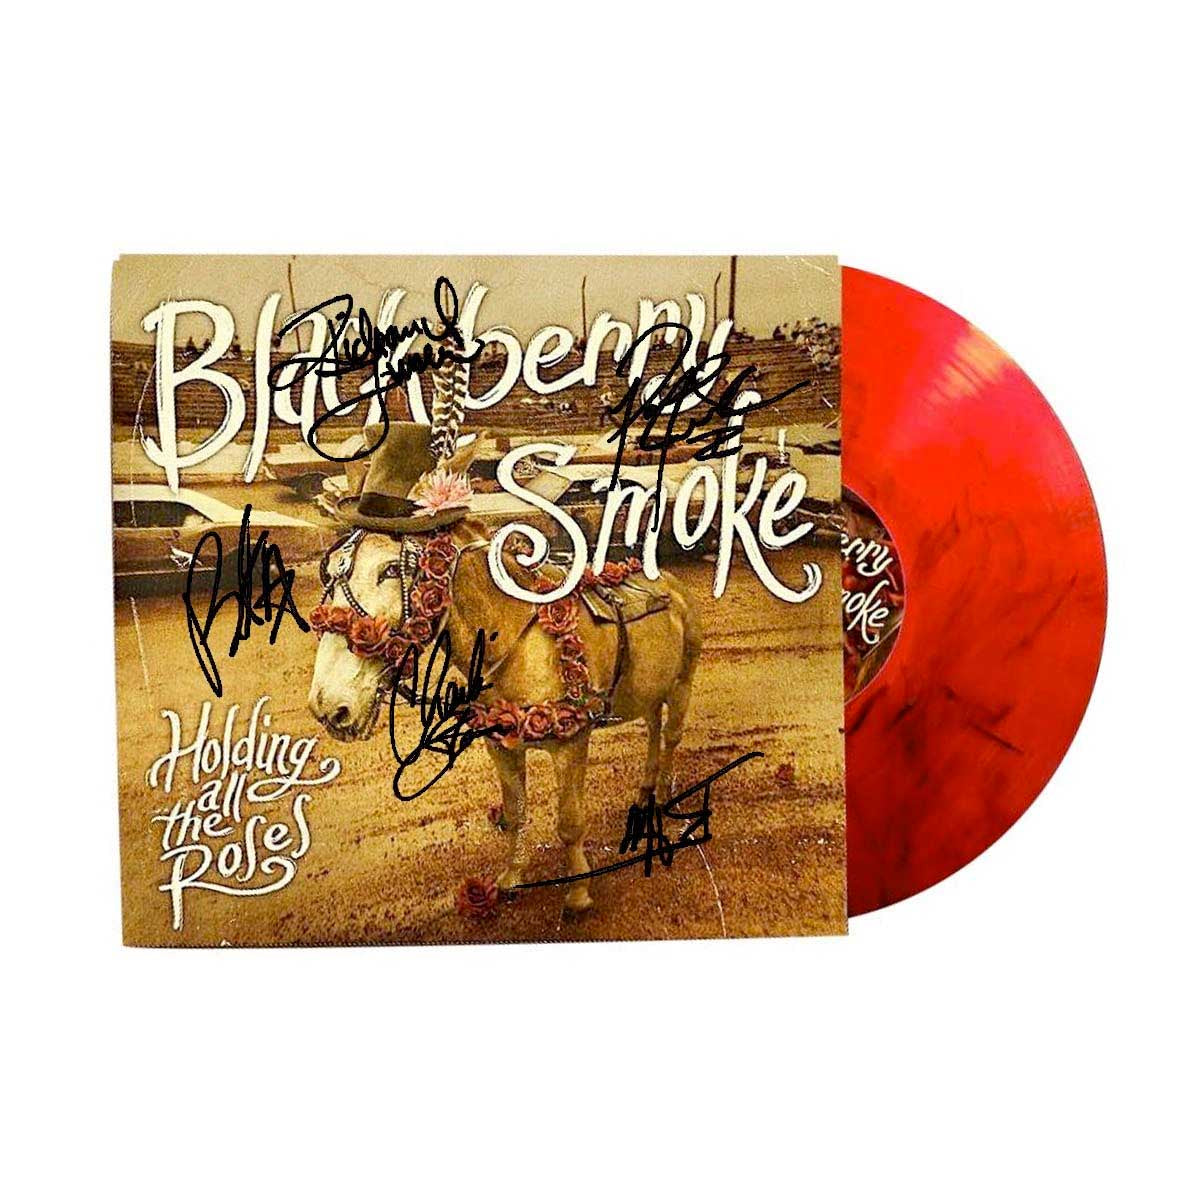 Signed HOLDING ALL THE ROSES LIMITED EDITION VINYL